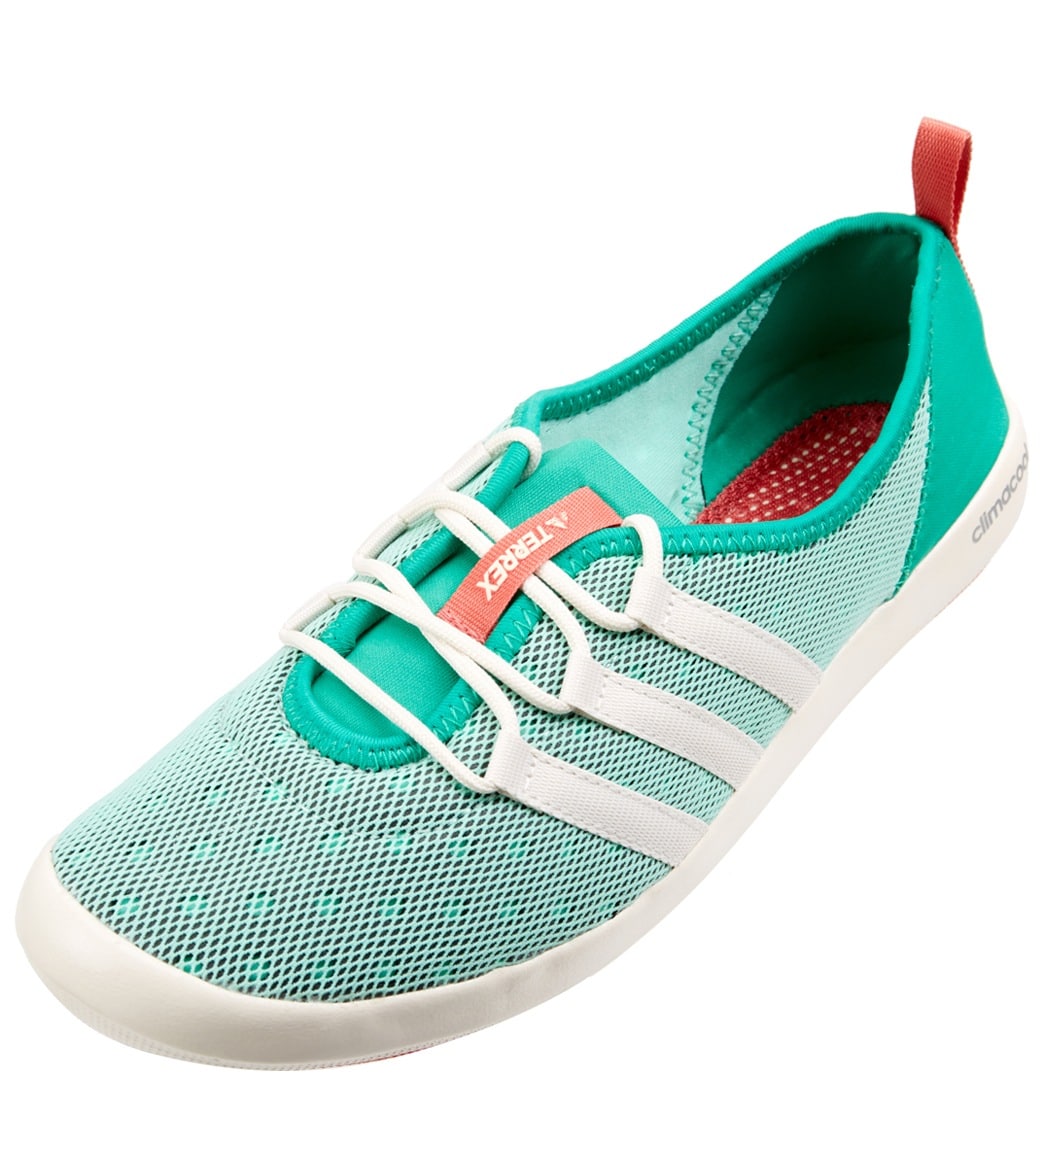 Adidas Climacool Boat Shoes at SwimOutlet.com